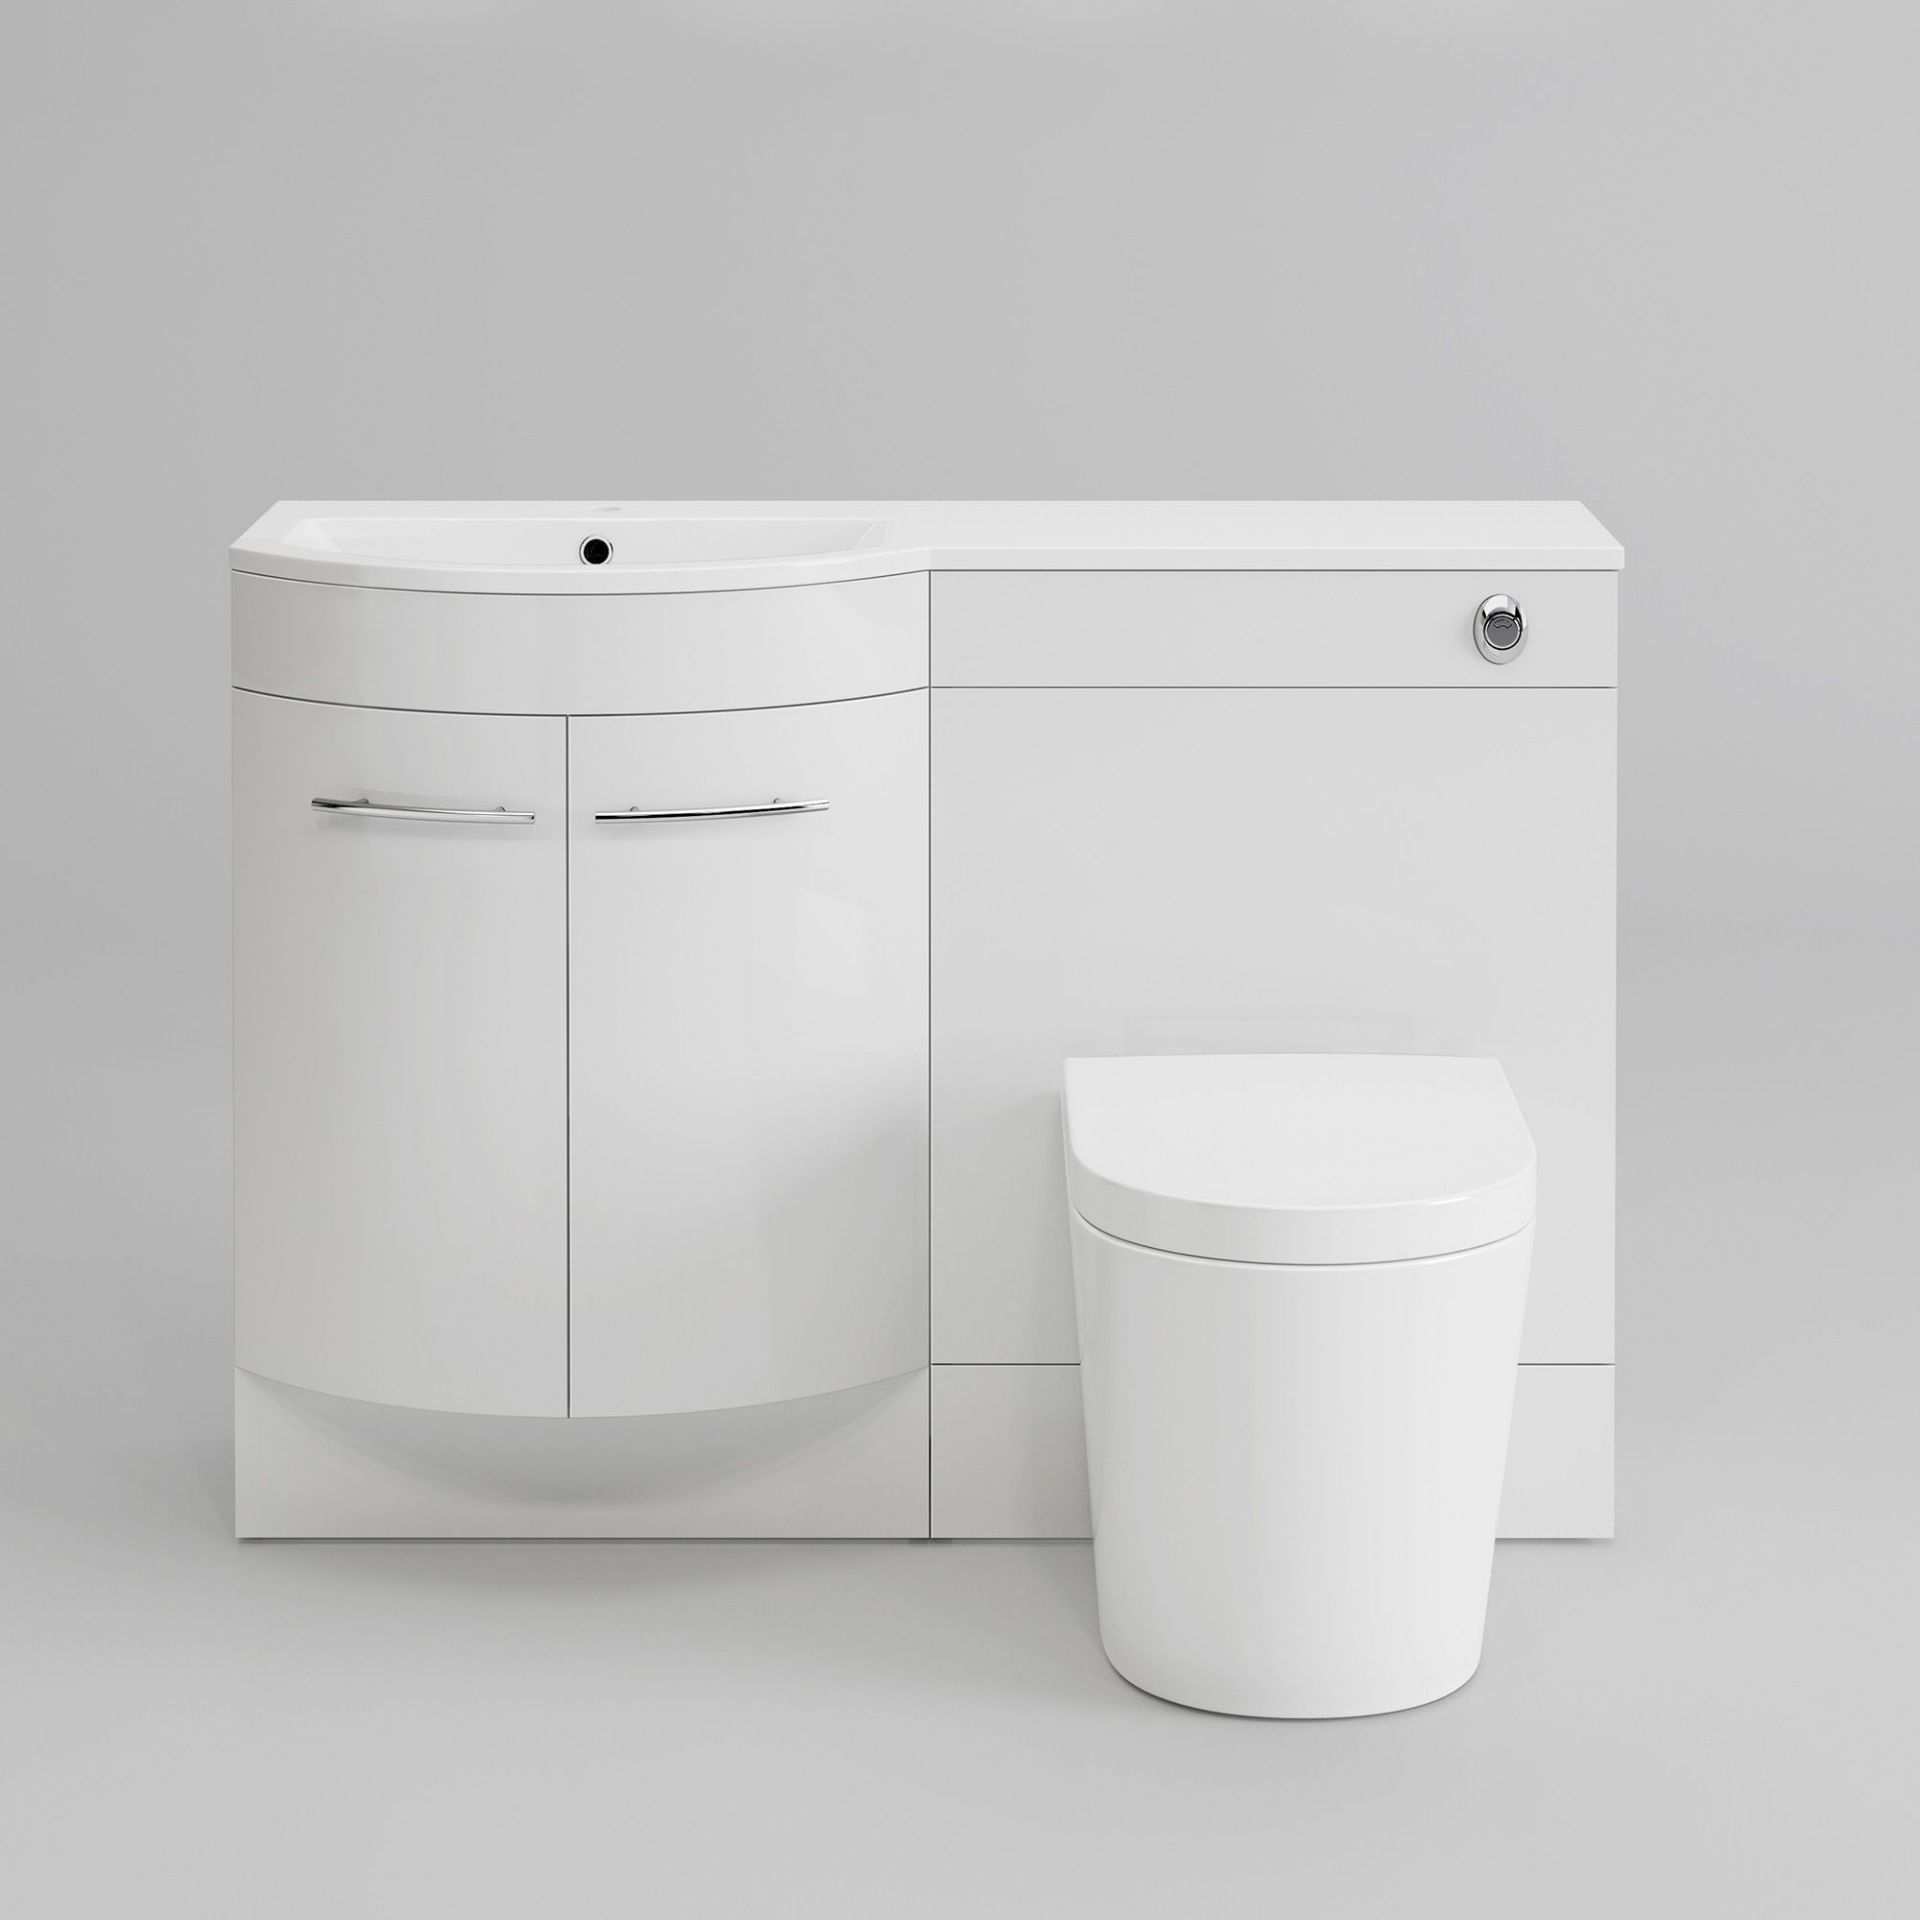 New Boxed 1200mm Alexis White Gloss Left Hand Vanity Unit Florence Back To Wall Pan. RRP £999.99. - Image 2 of 3